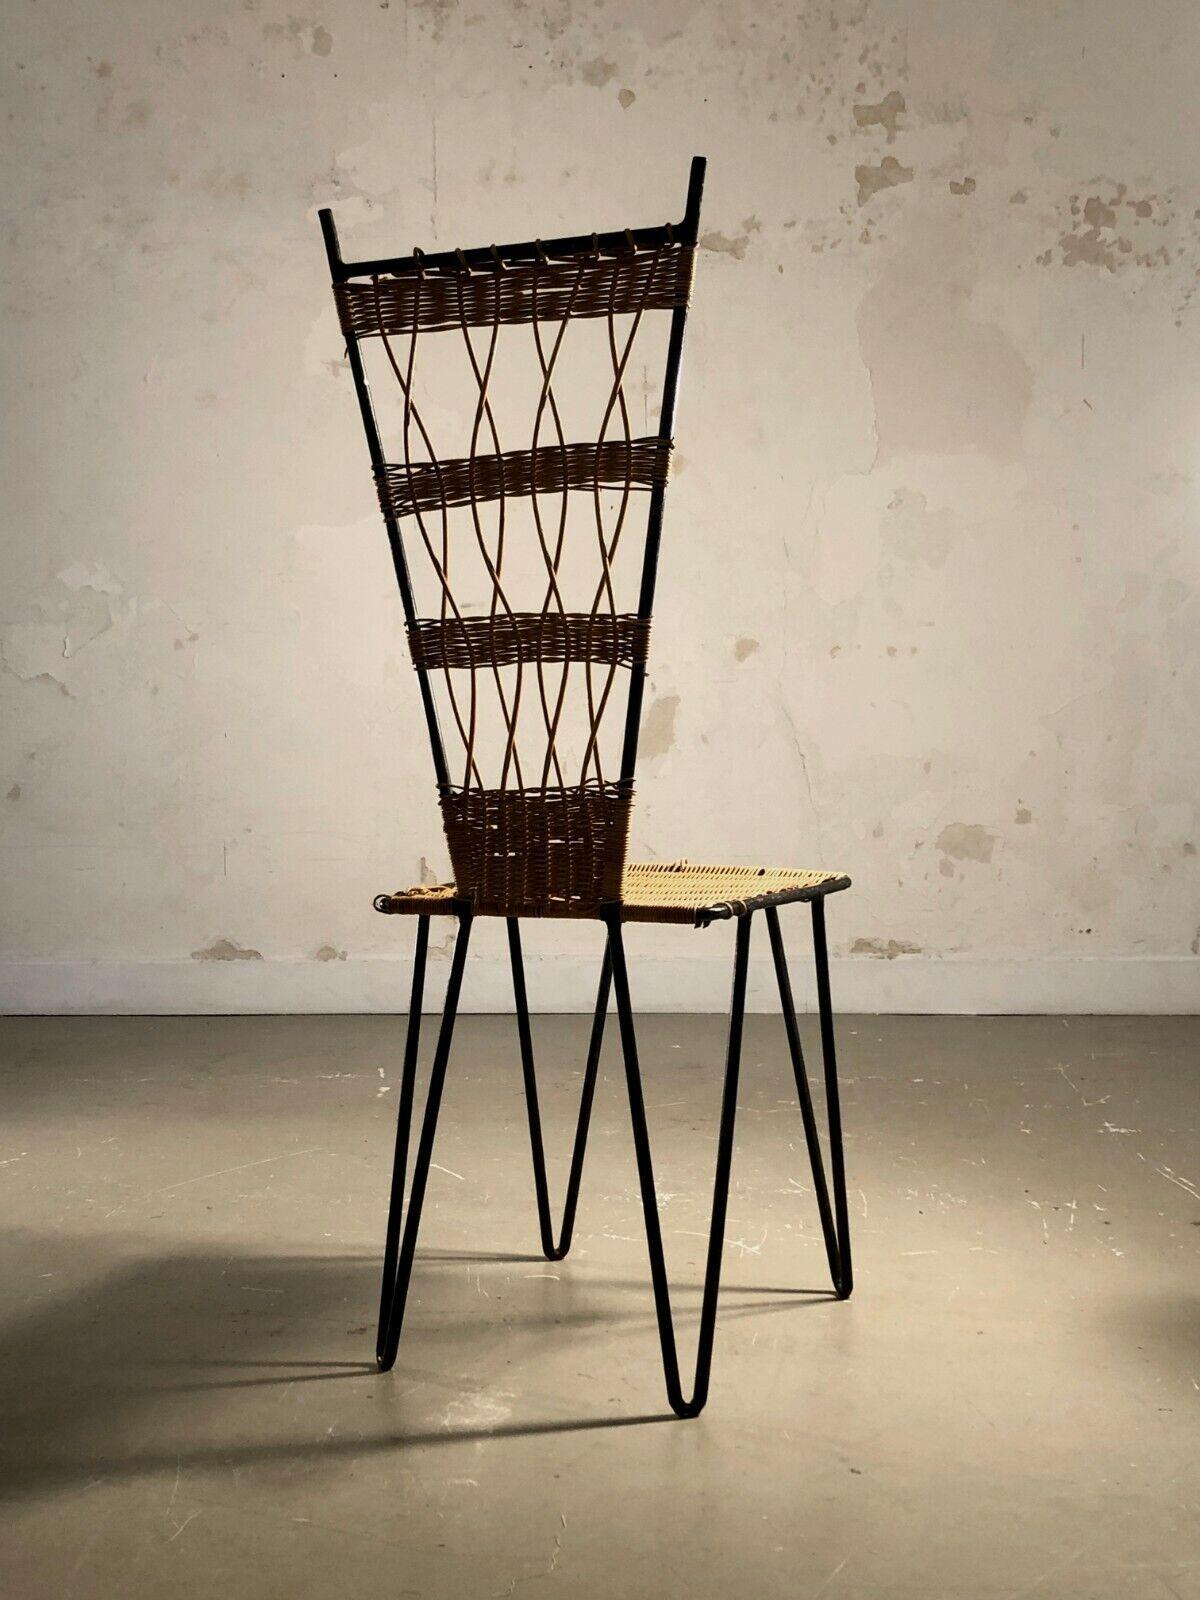 Metal A Sculptural MID-CENTURY-MODERN MODERNIST CHAIR by RAOUL GUYS, France 1950 For Sale